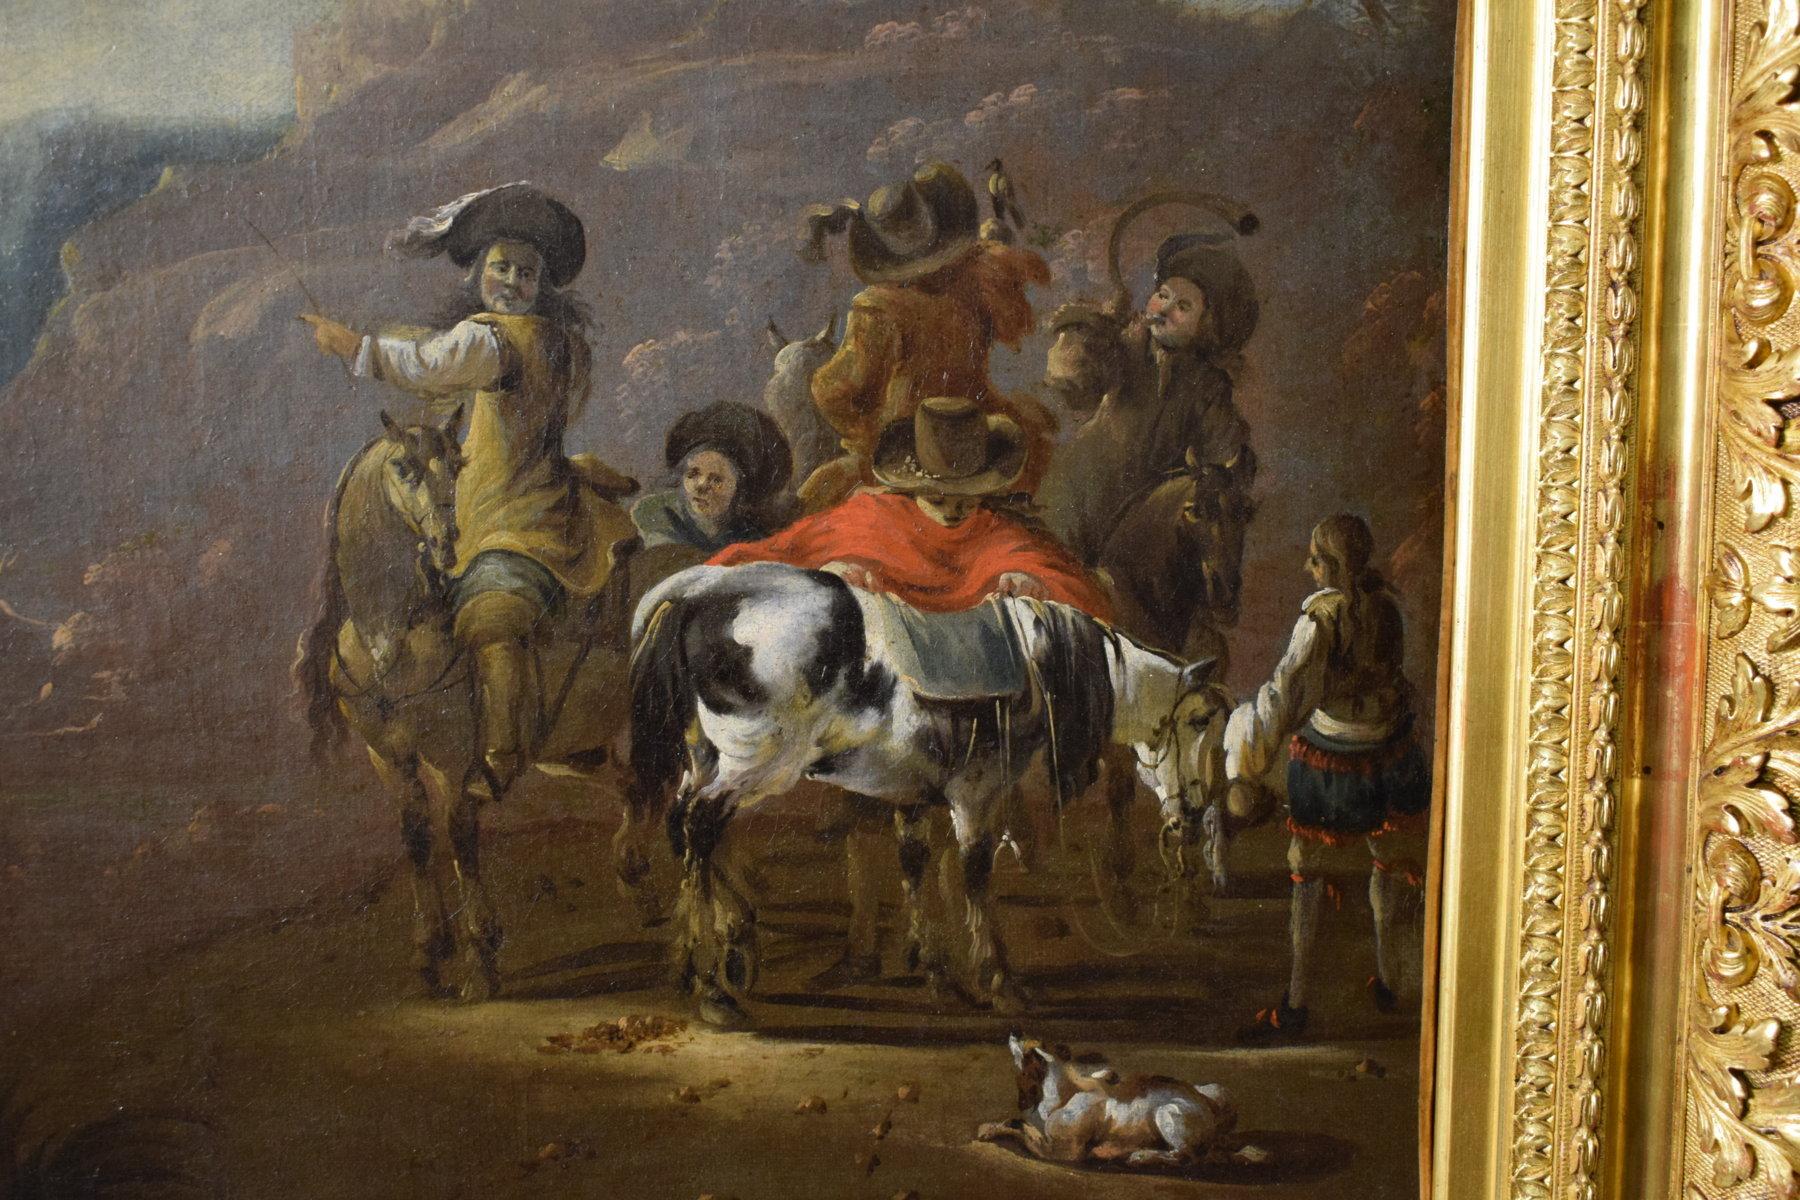 17th century, oil on canvas Dutch painting with hunting scene

Oil on canvas. Dimensions: frame W 81 x H 75 cm, canvas 58 x 49 cm

The oil on canvas painting depicts a hunting scene in a predominantly rocky landscape. On the right, at the center